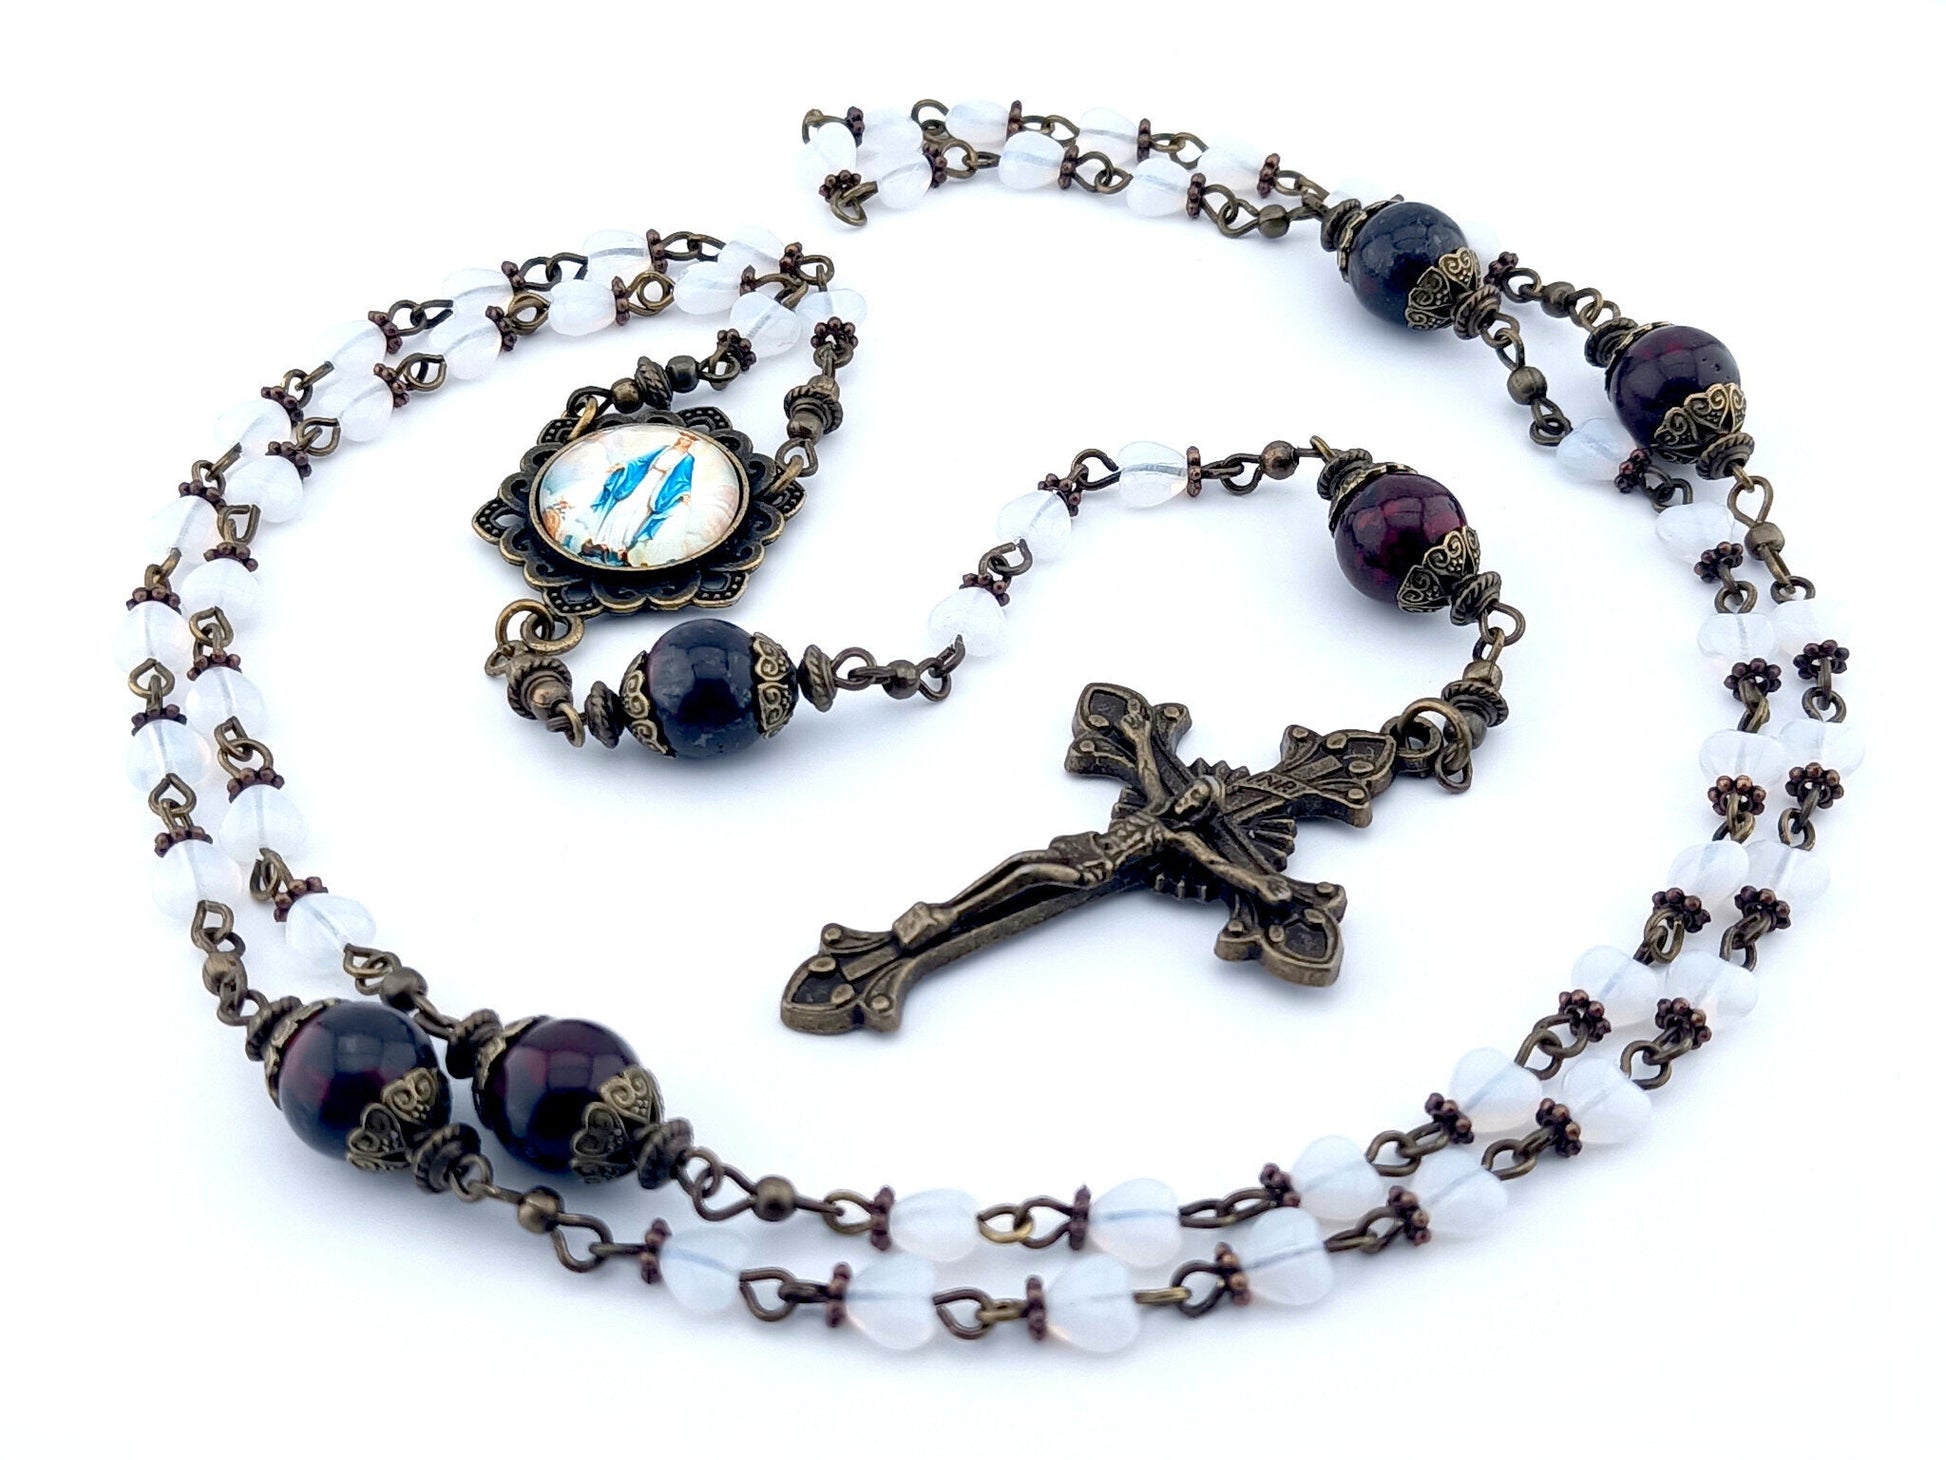 Our Lady of Grace unique rosary beads with white heart glass beads, deep red jade gemstone pater beads, bronze crucifix, picture centre medal and bead caps.